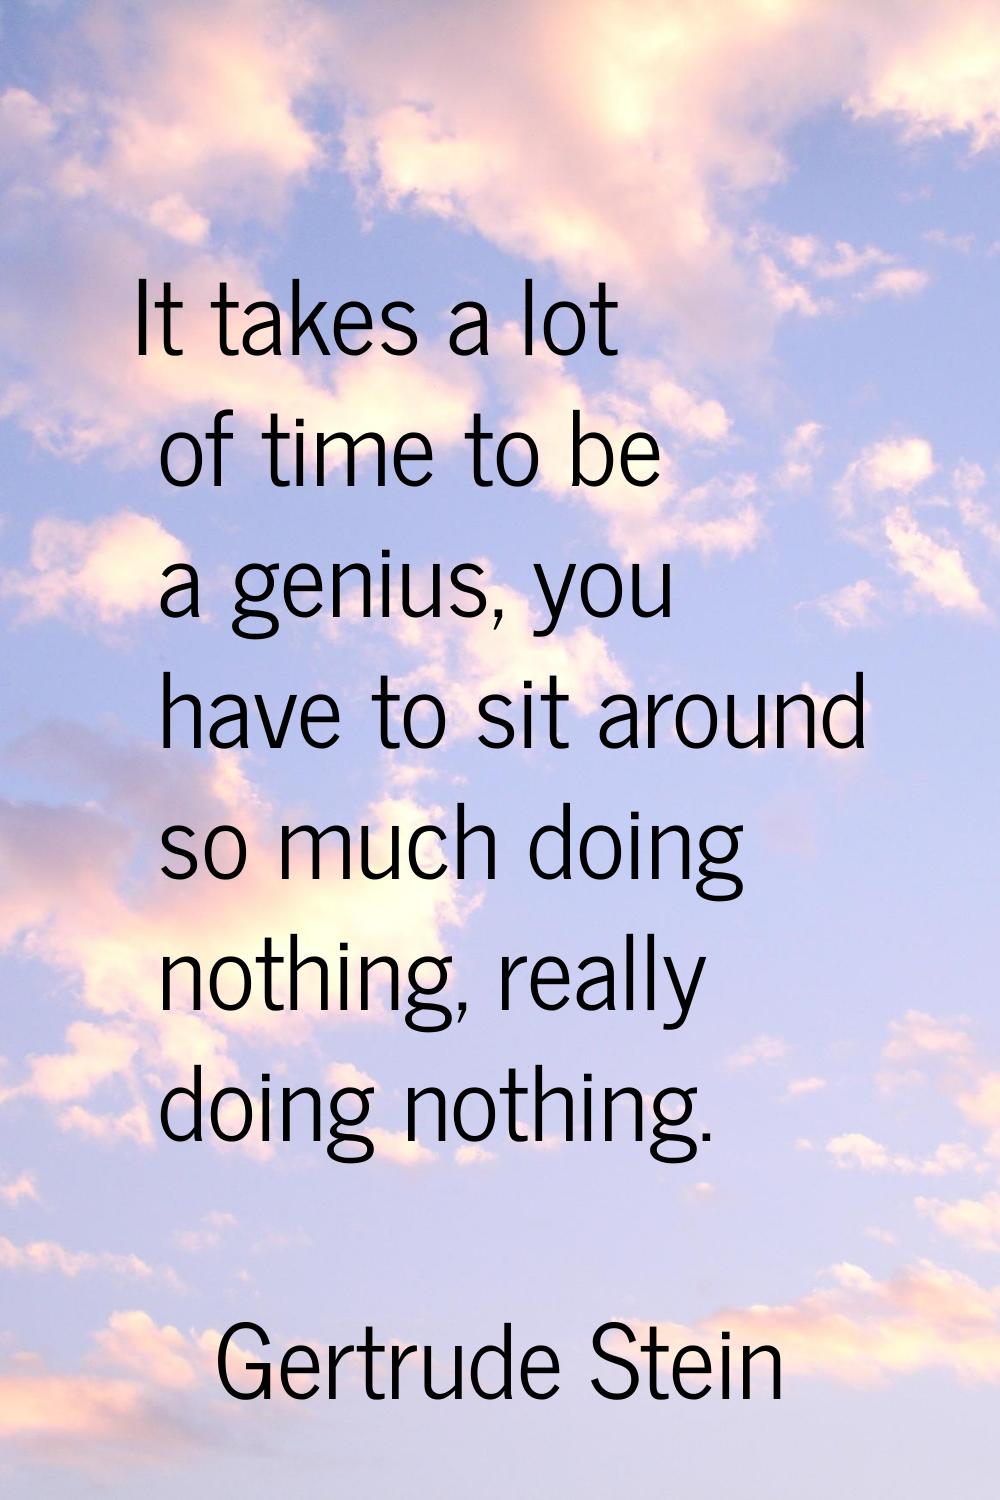 It takes a lot of time to be a genius, you have to sit around so much doing nothing, really doing n